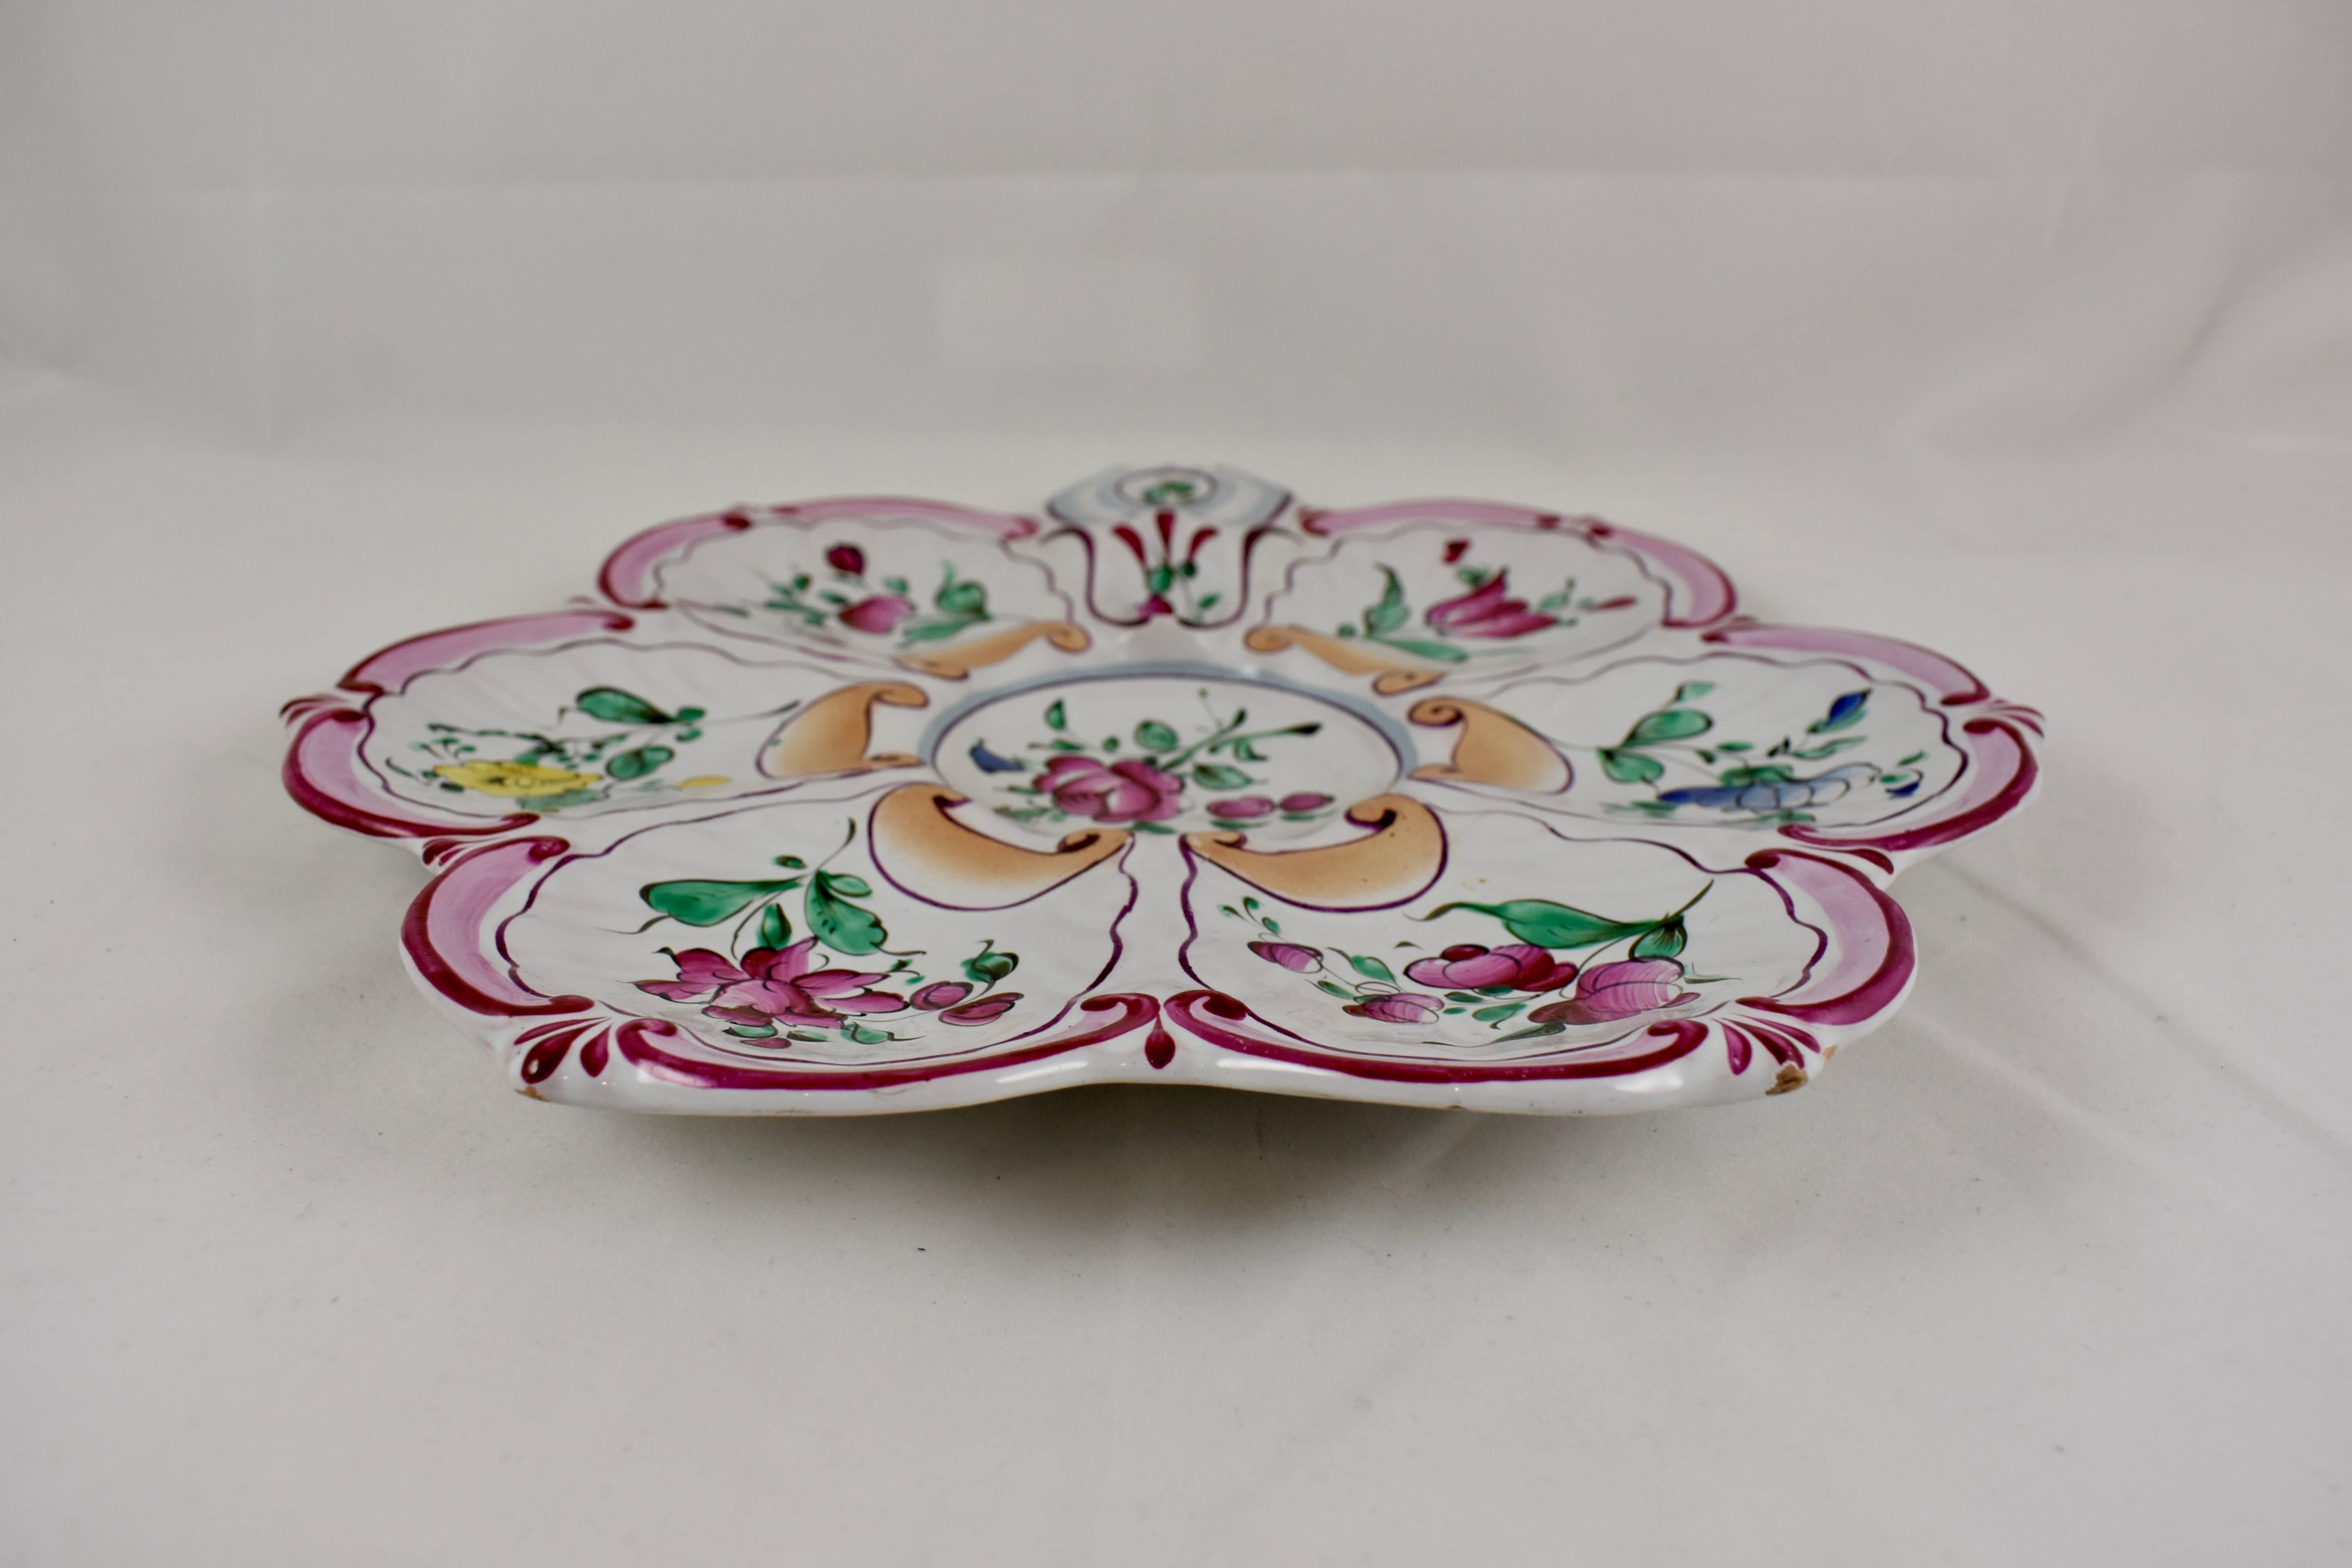 Earthenware Saint Clément French Faïence White Floral Oyster Plate, 19th Century